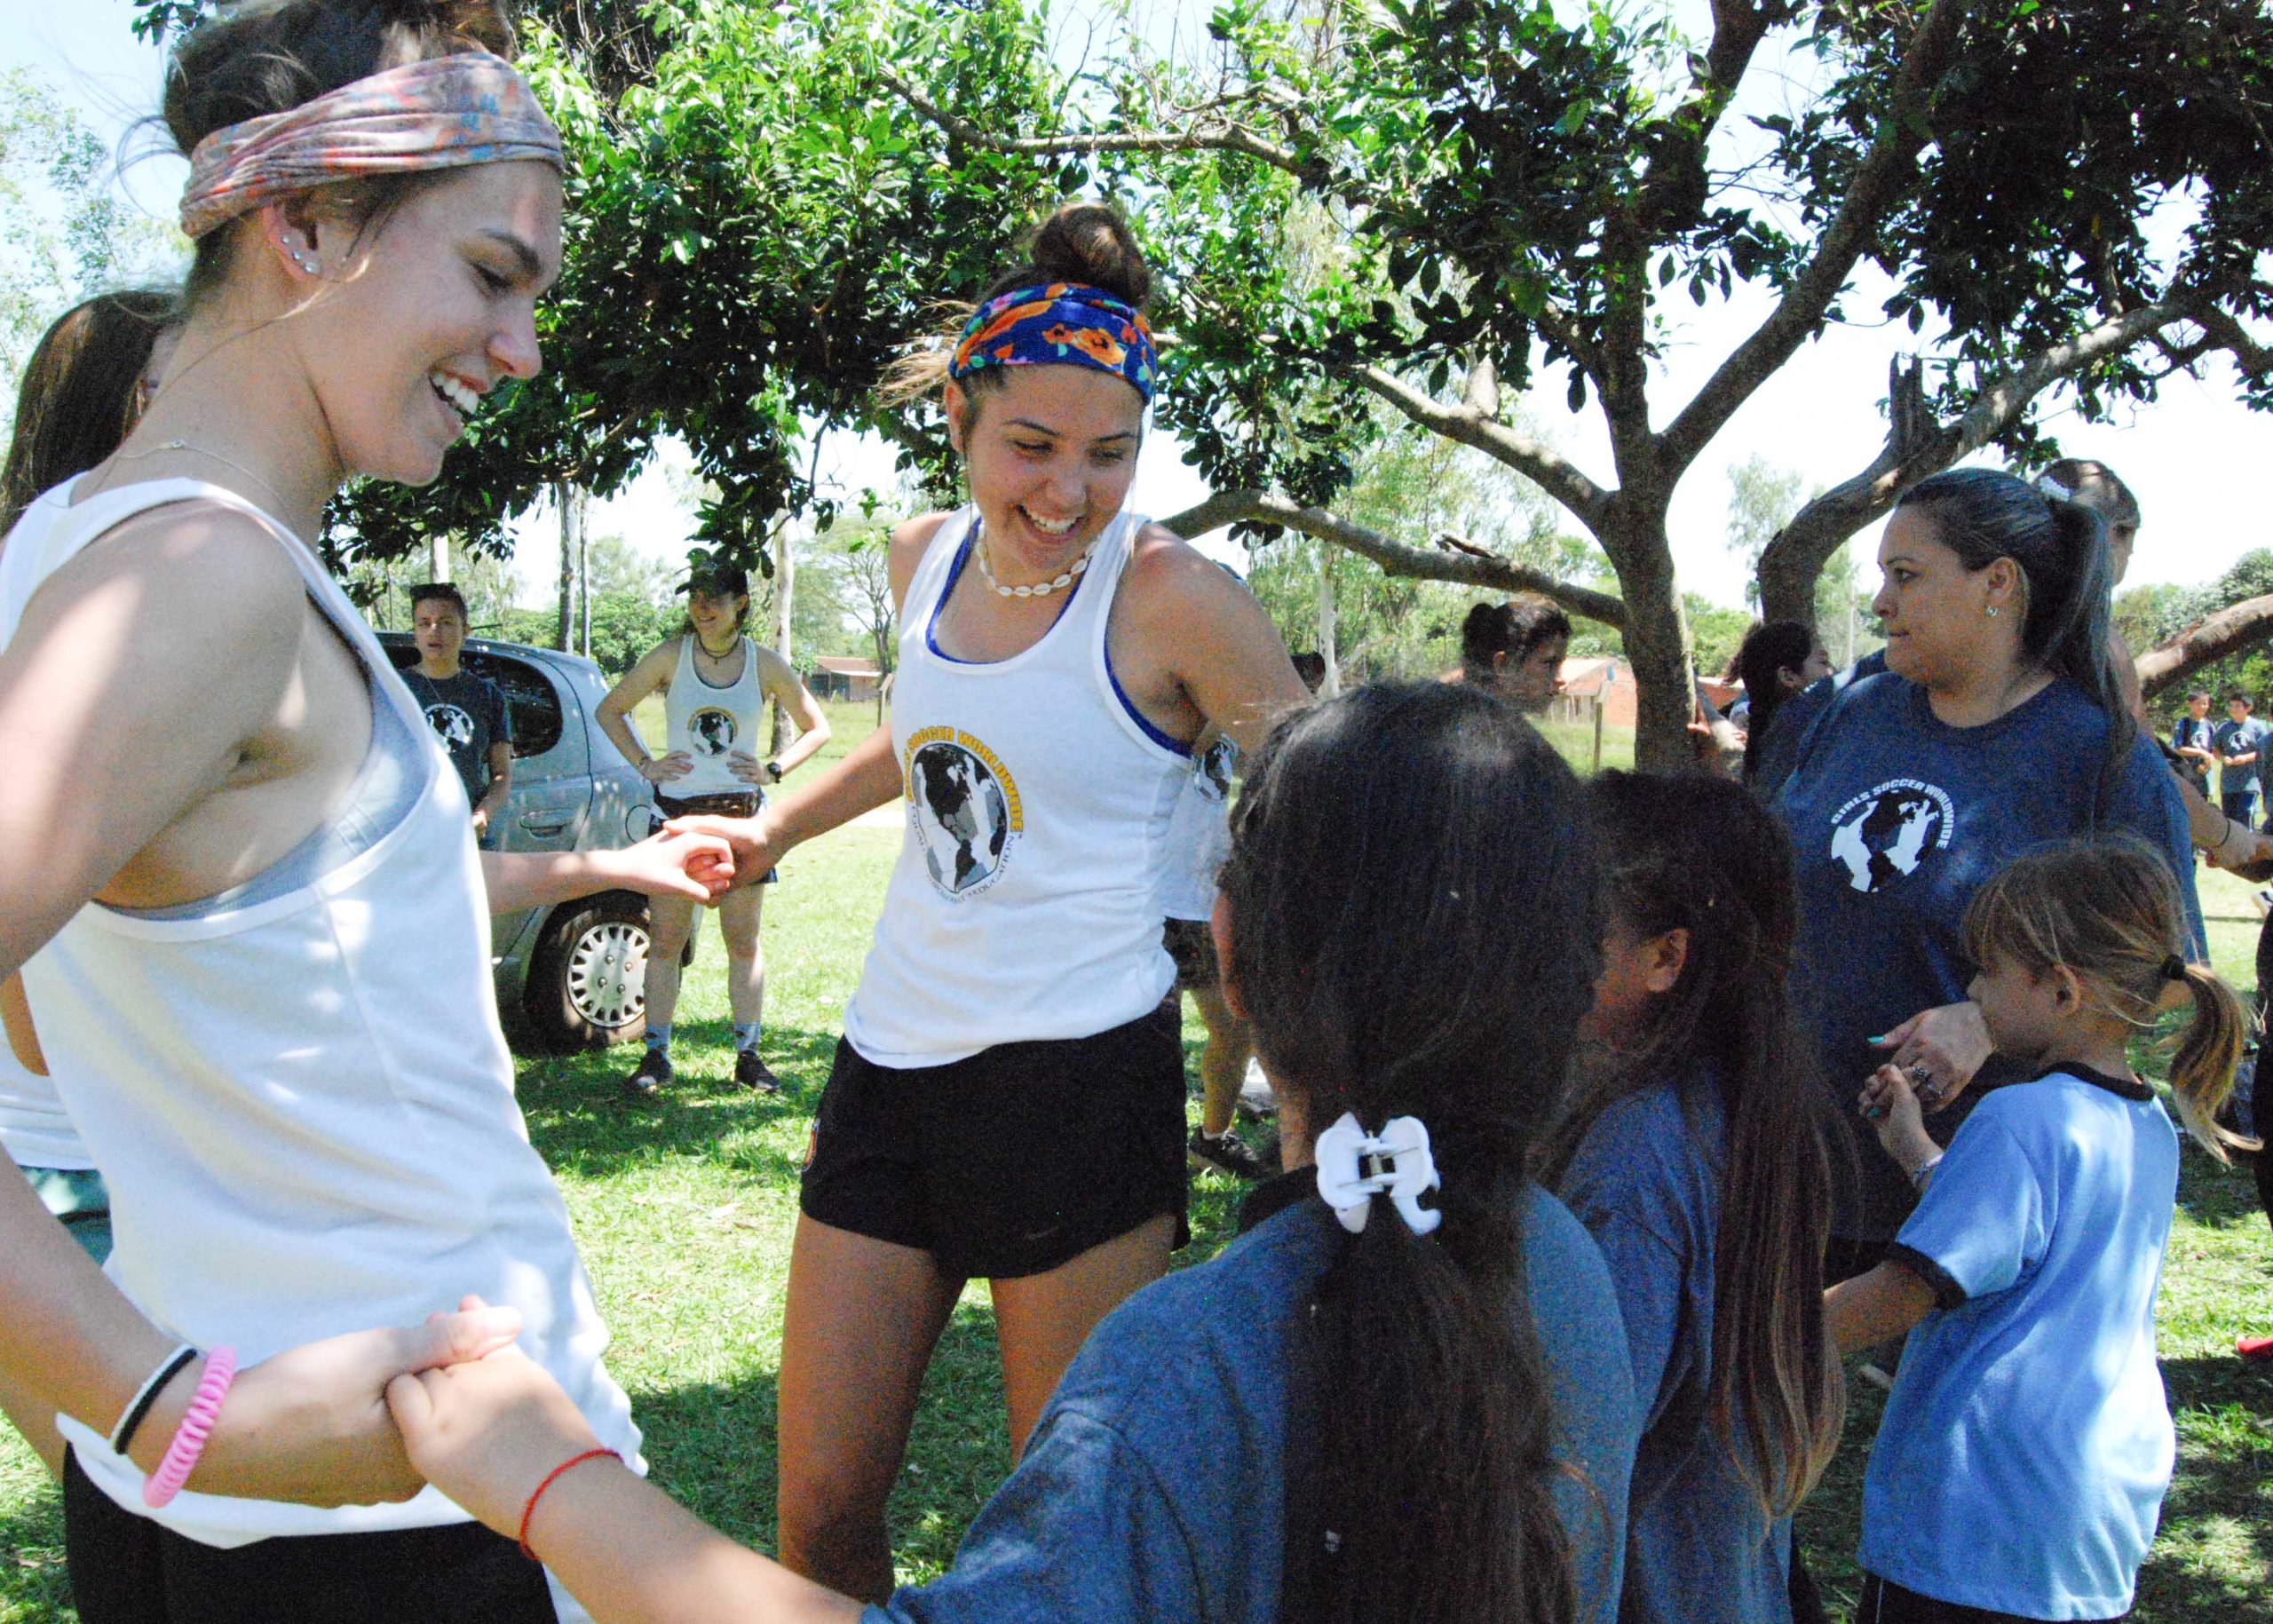 Emily with Girls Soccer Worldwide Ambassador Megan Guerra, bonding with young girls in Paraguay.